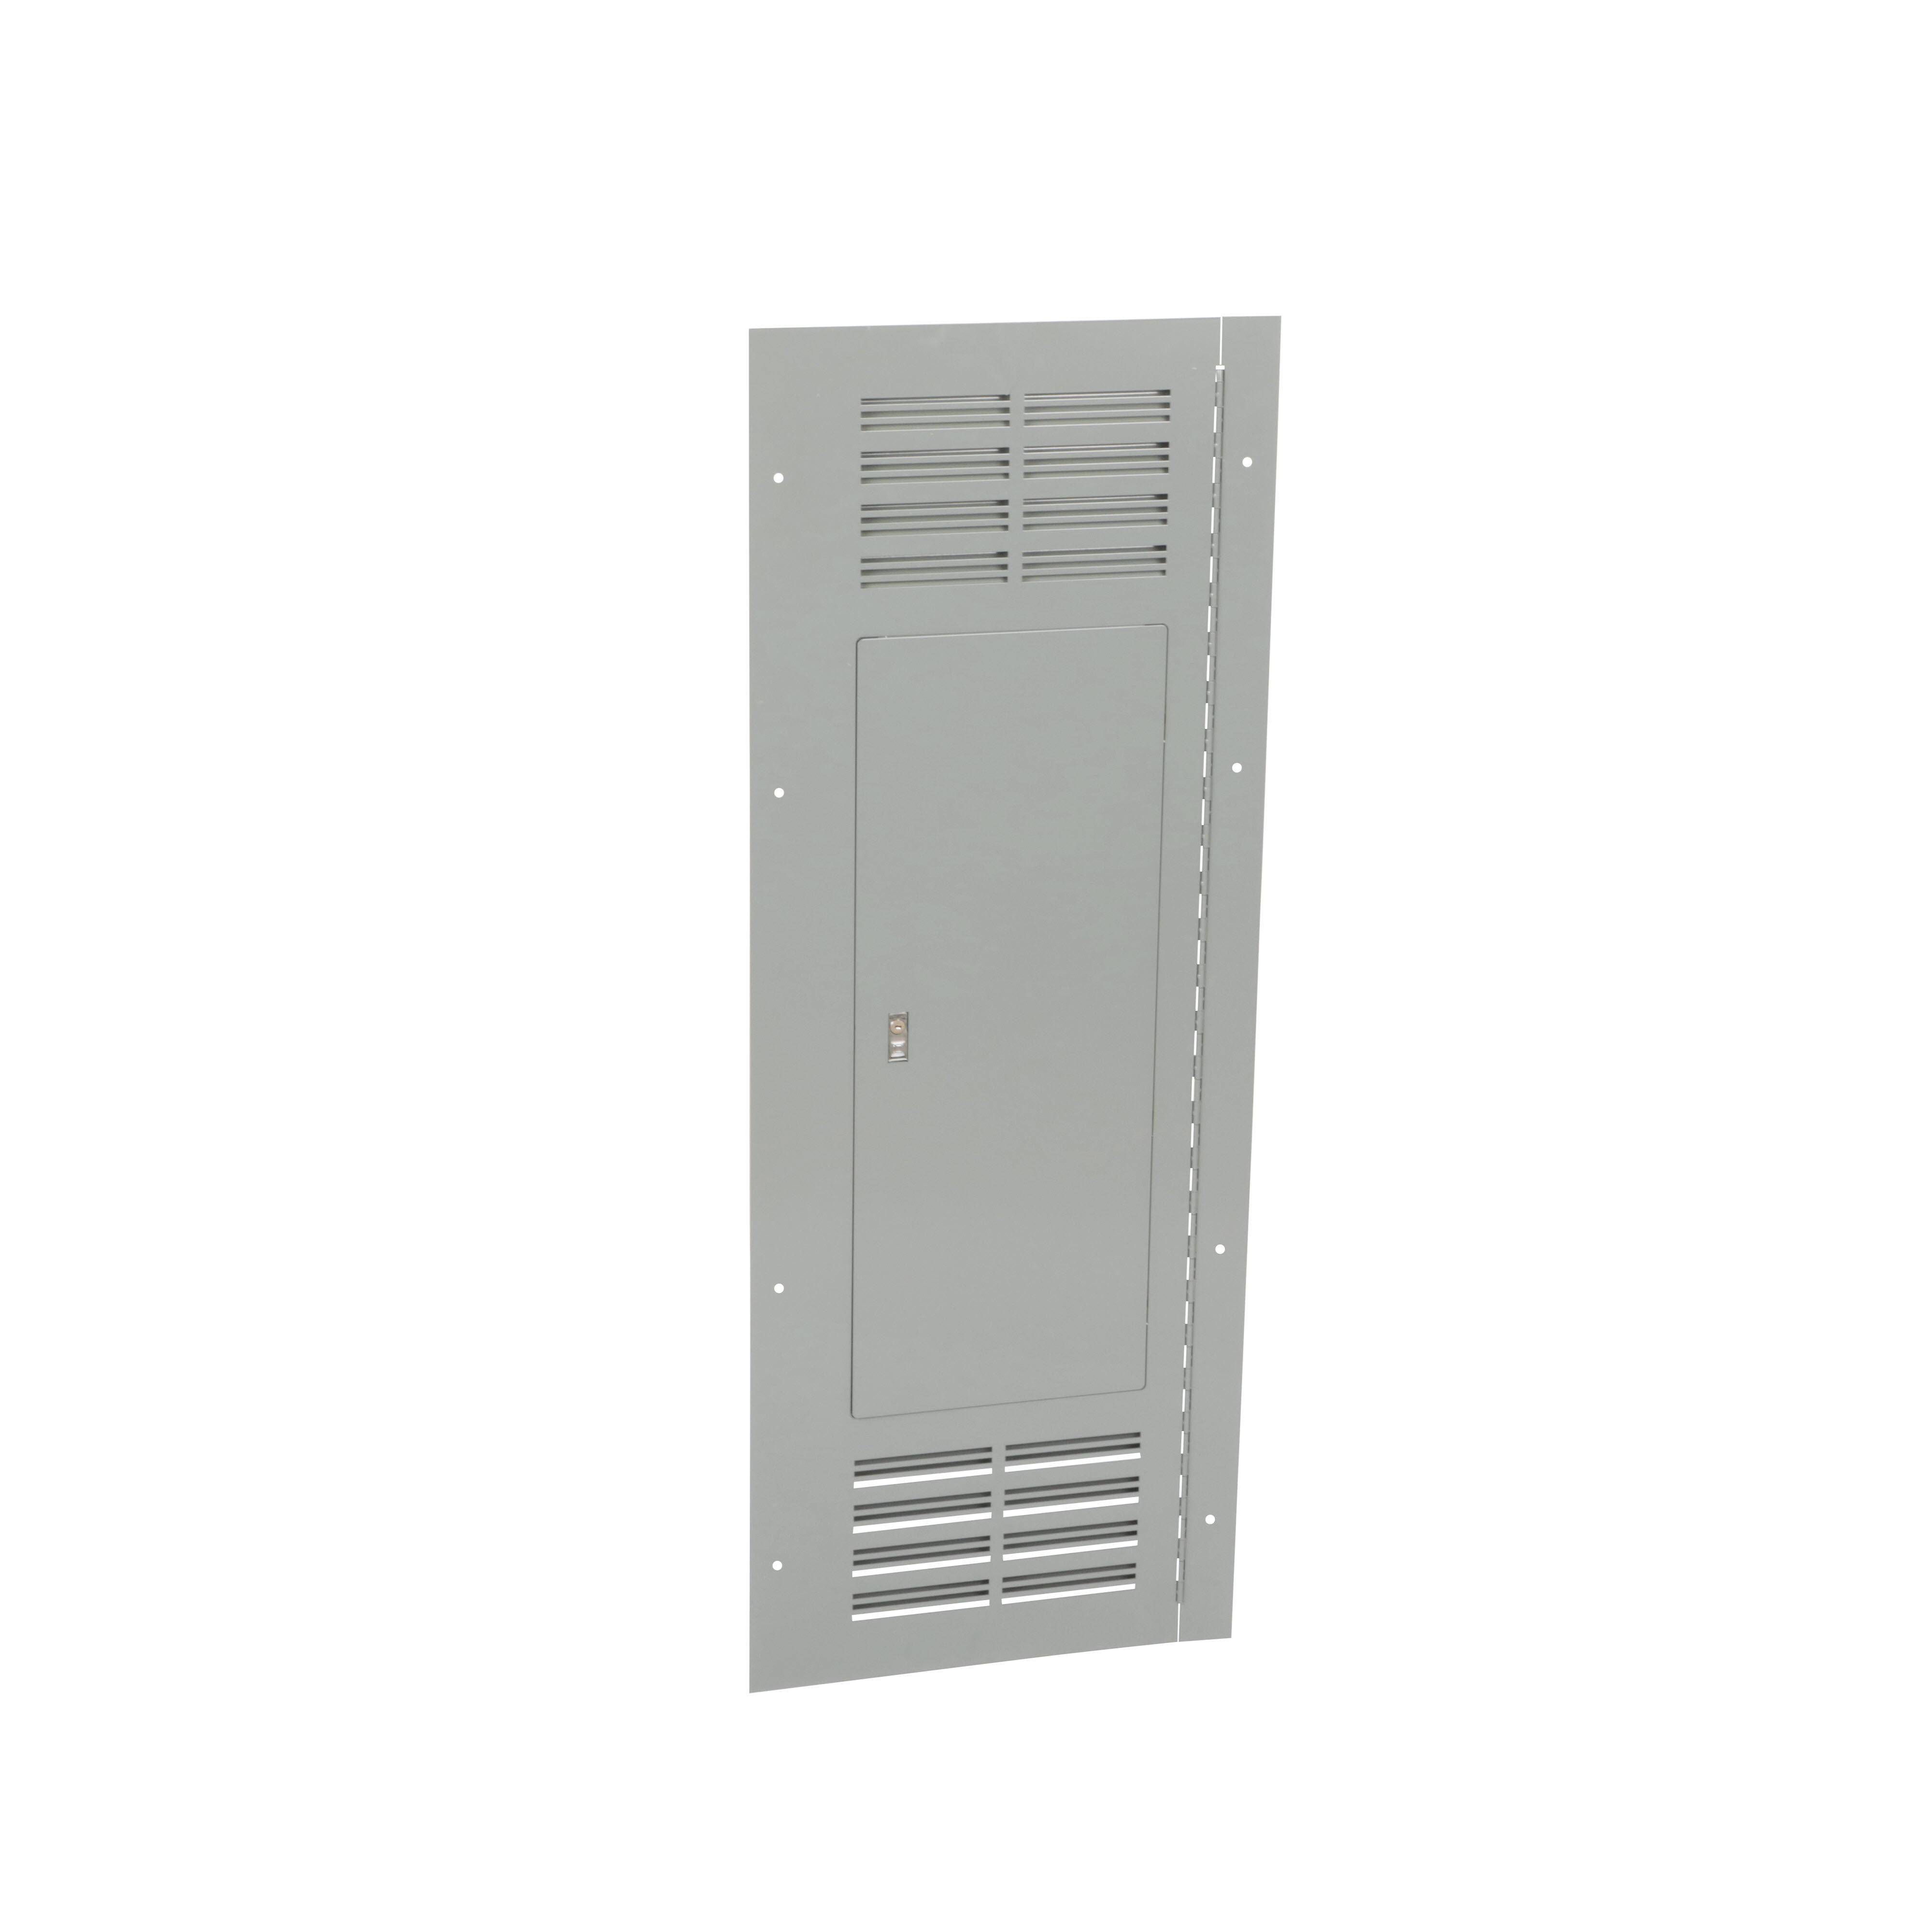 Enclosure cover, NQ and NF panelboards, NEMA 1, flush, ventilated, hinged, 20in W x 56in H